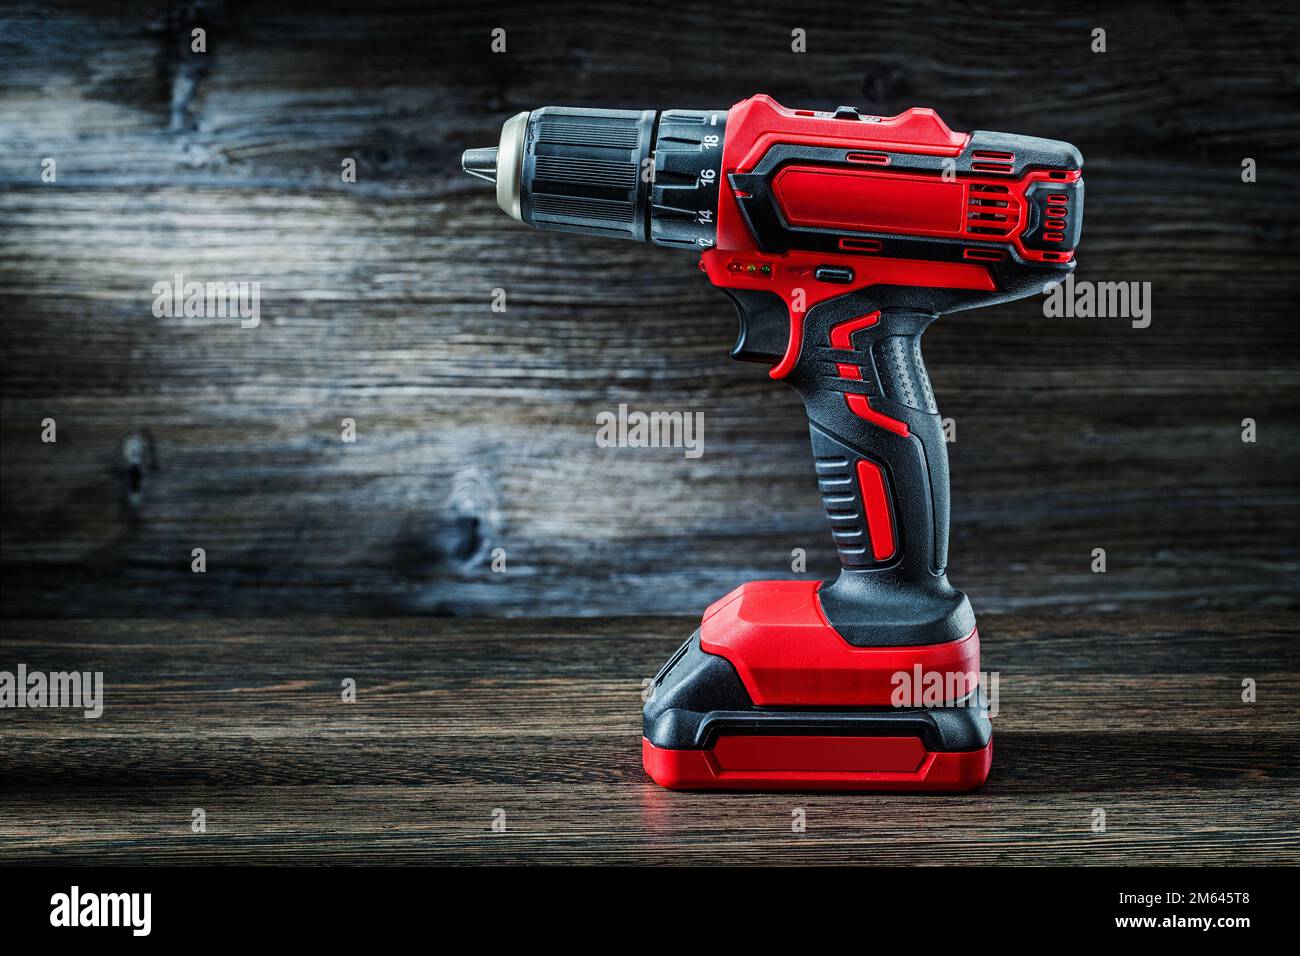 https://c8.alamy.com/comp/2M645T8/red-cordless-drill-driver-electric-screwdriver-on-vintage-wood-background-2M645T8.jpg